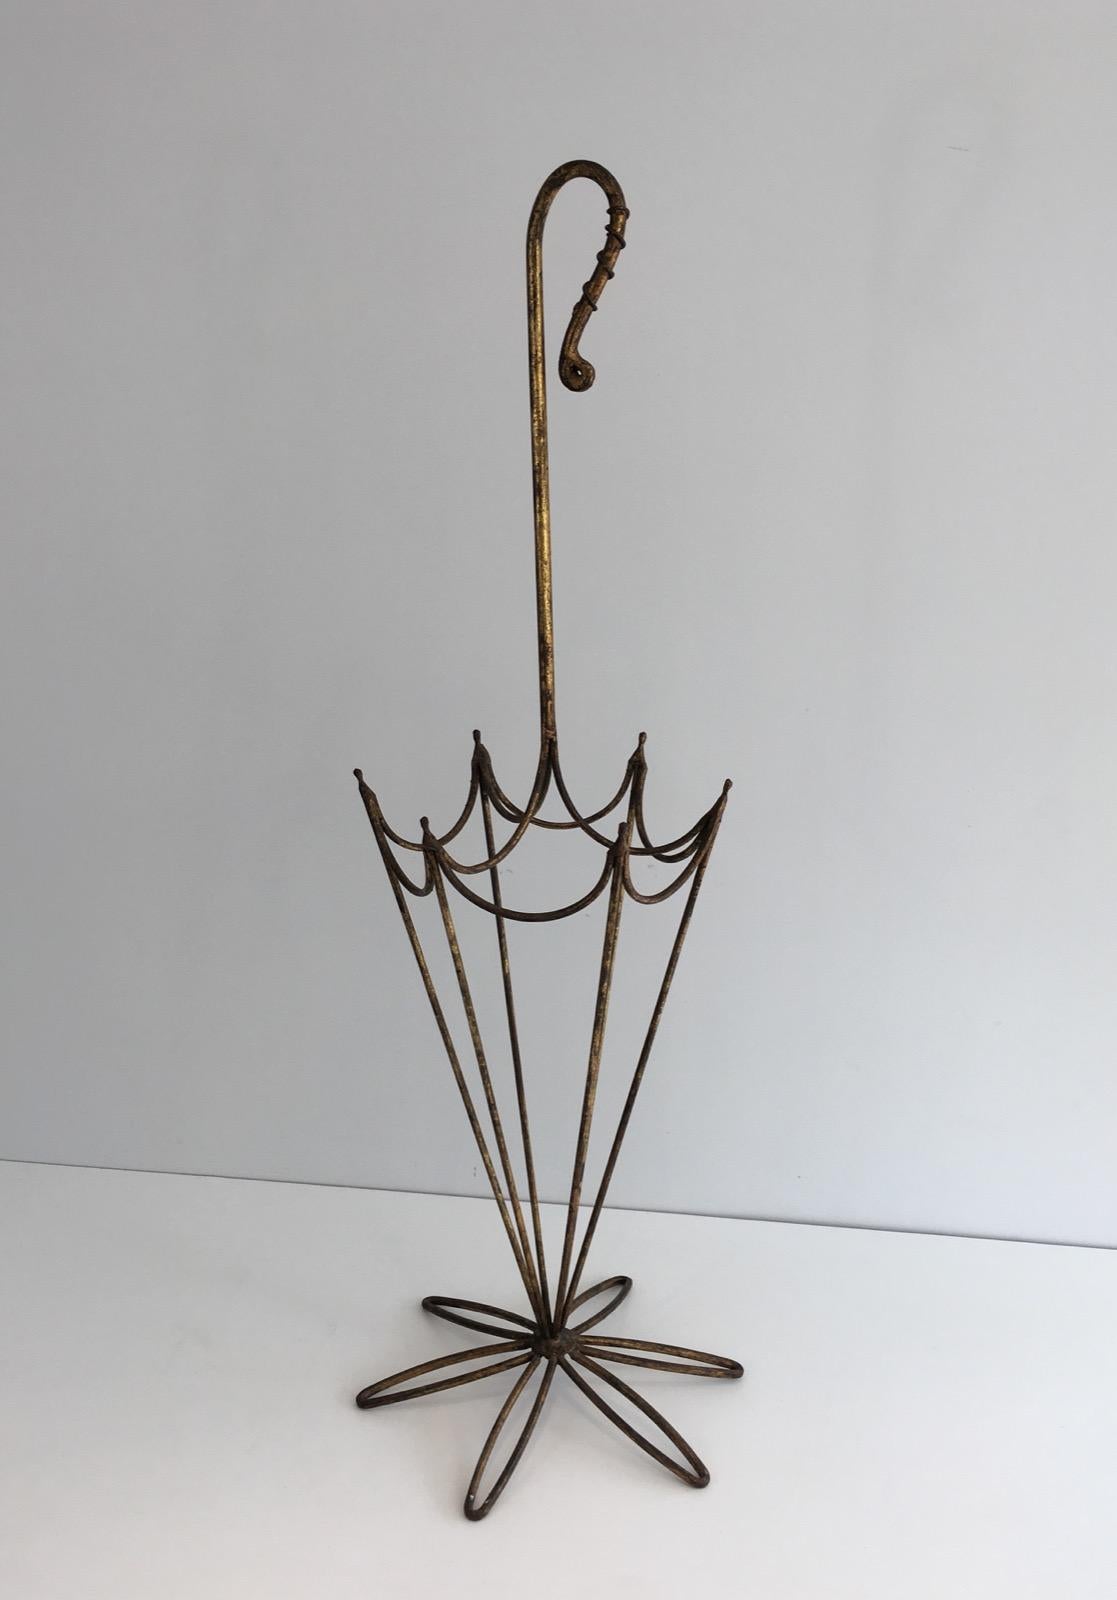 This unusual umbrella stand is made of gold gilt iron. This represents an umbrella made of gild gilt iron. This is a Spanish work form 1940.